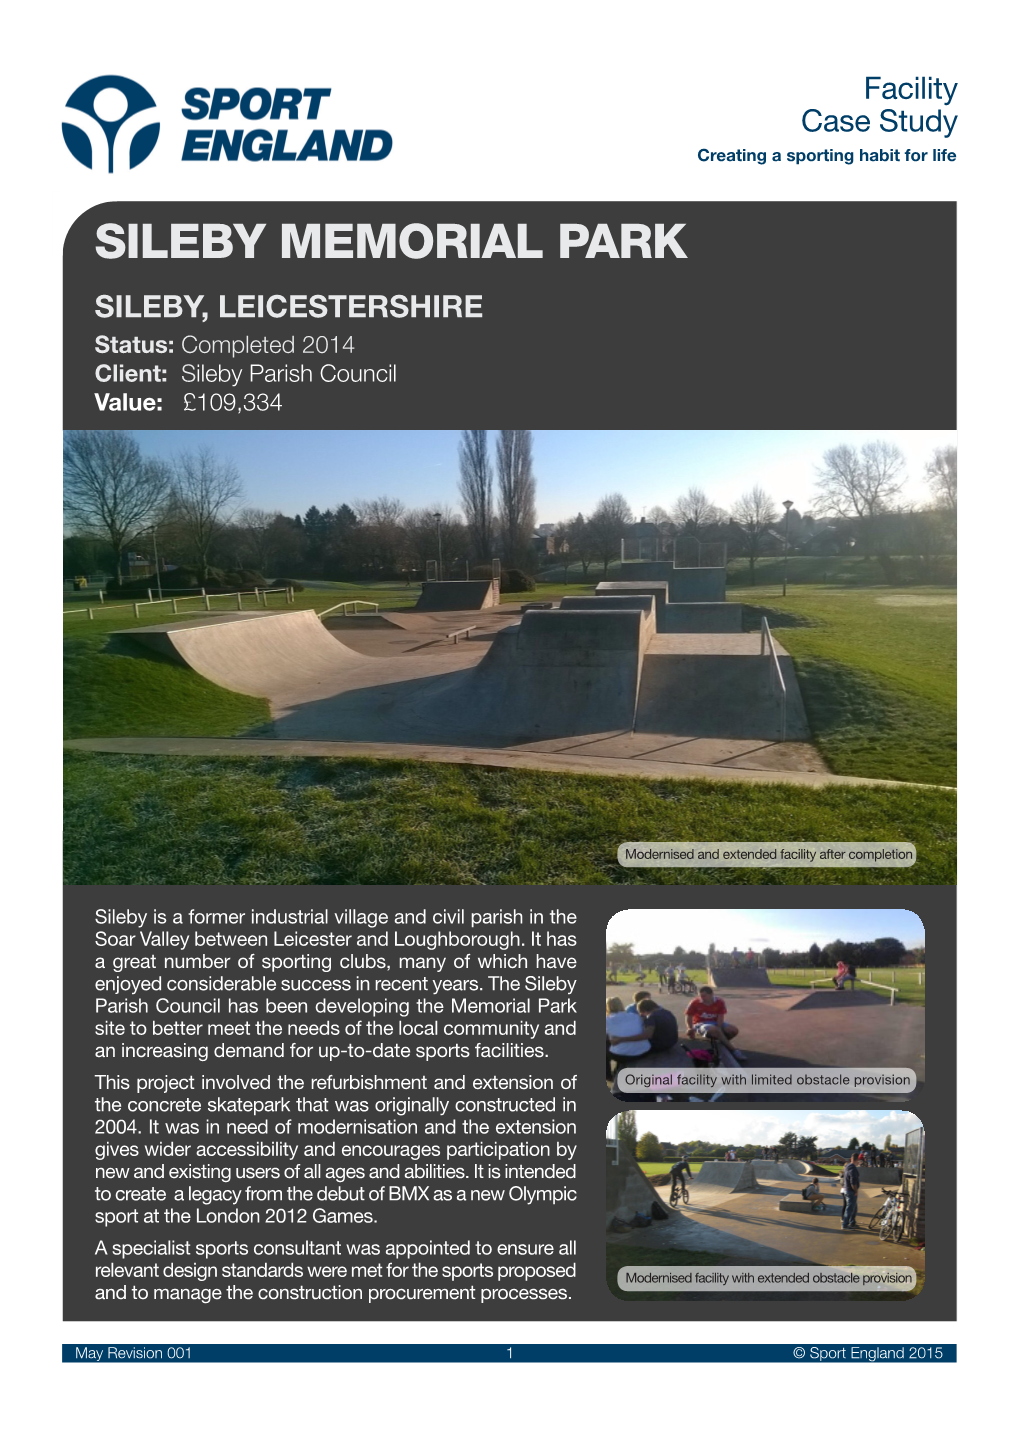 SILEBY MEMORIAL PARK SILEBY, LEICESTERSHIRE Status: Completed 2014 Client: Sileby Parish Council Value: £109,334